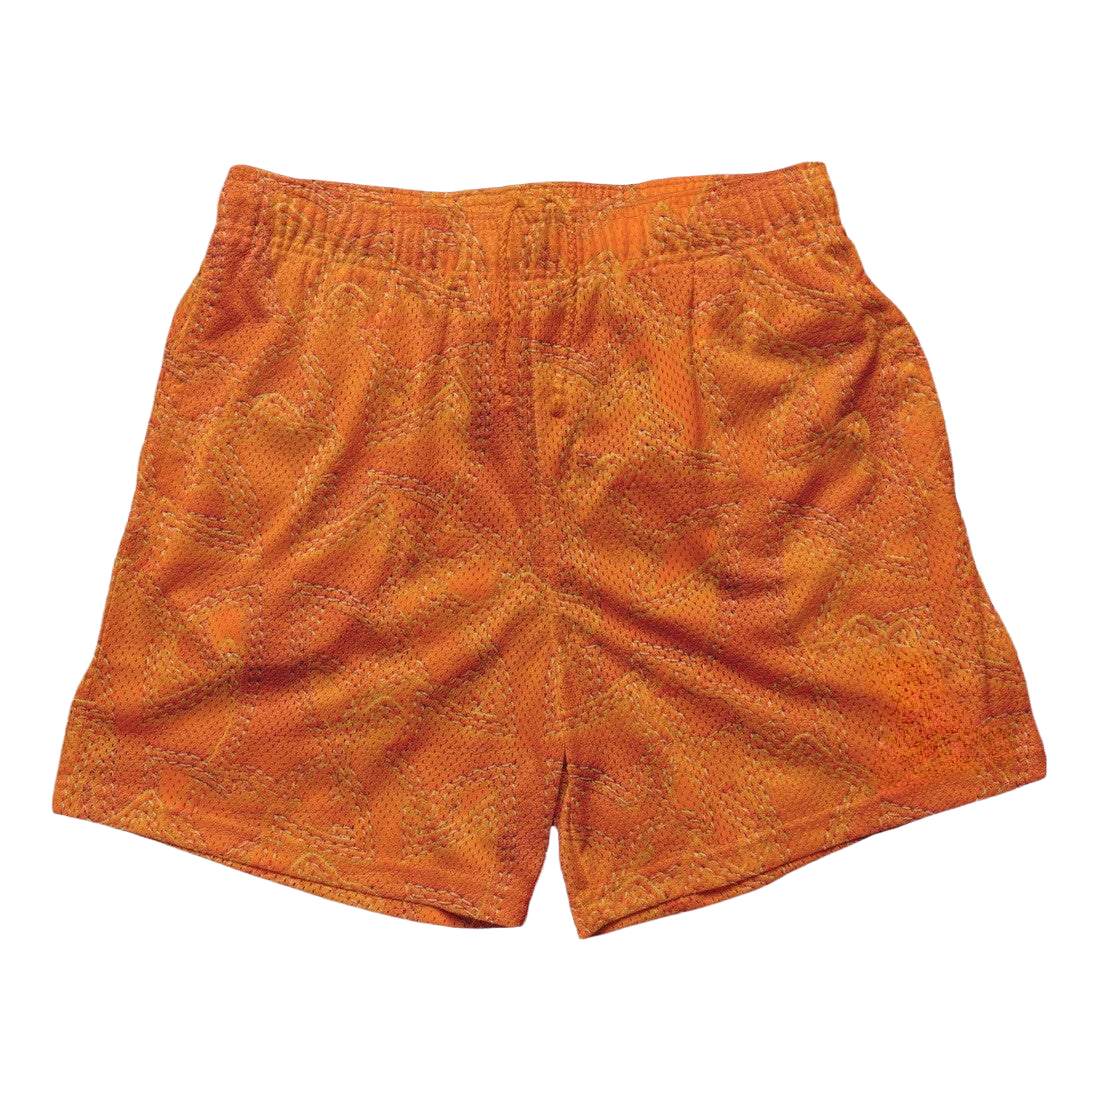 an orange shorts with a black background